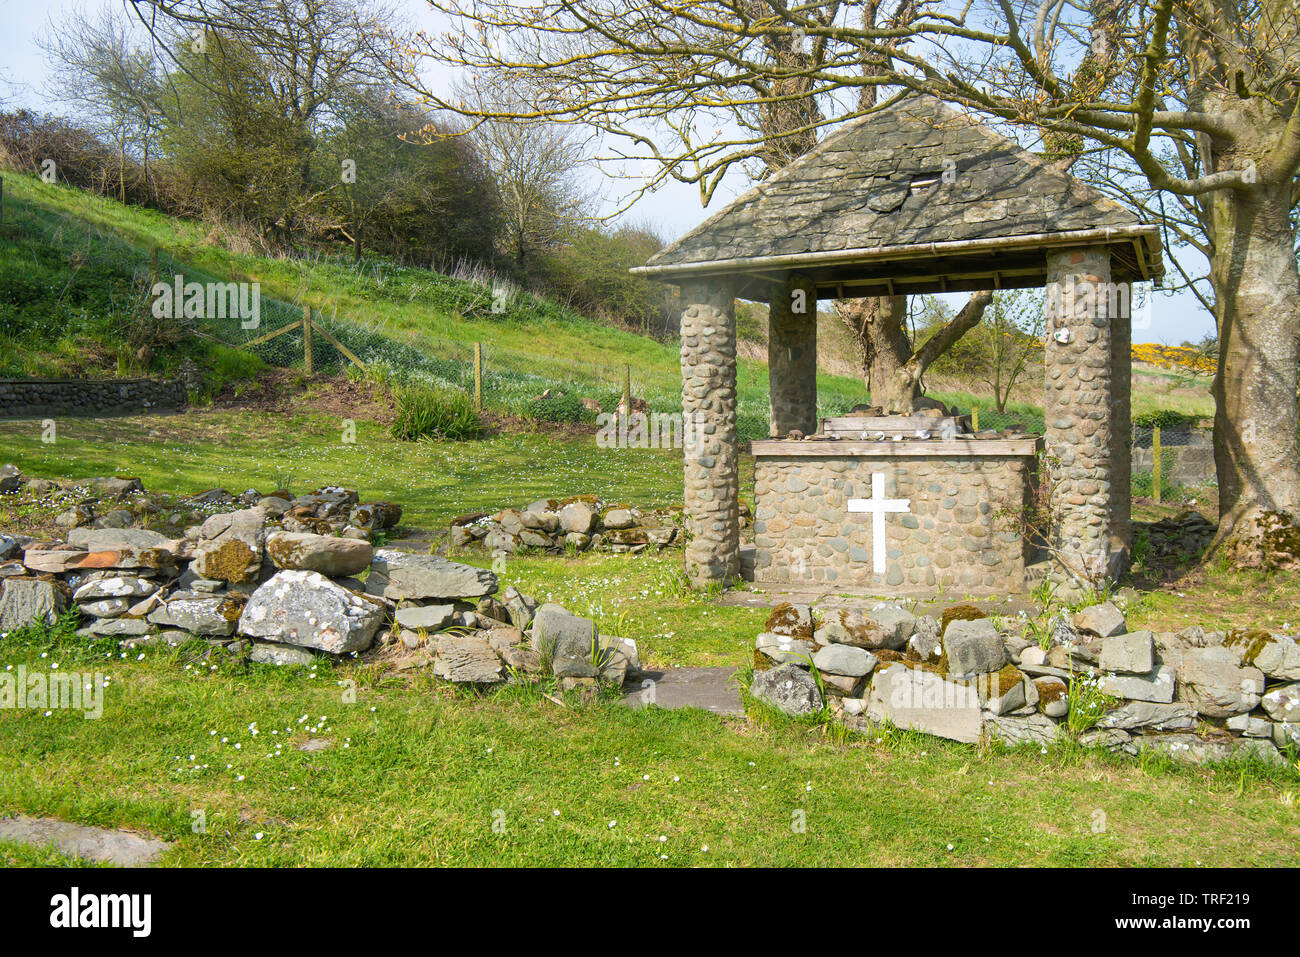 Outdoor altar at the Roman Catholic shrine 'Temple Cooey' at the Ards Peninsula, County Down, Northern Ireland, United Kingdom, UK Stock Photo